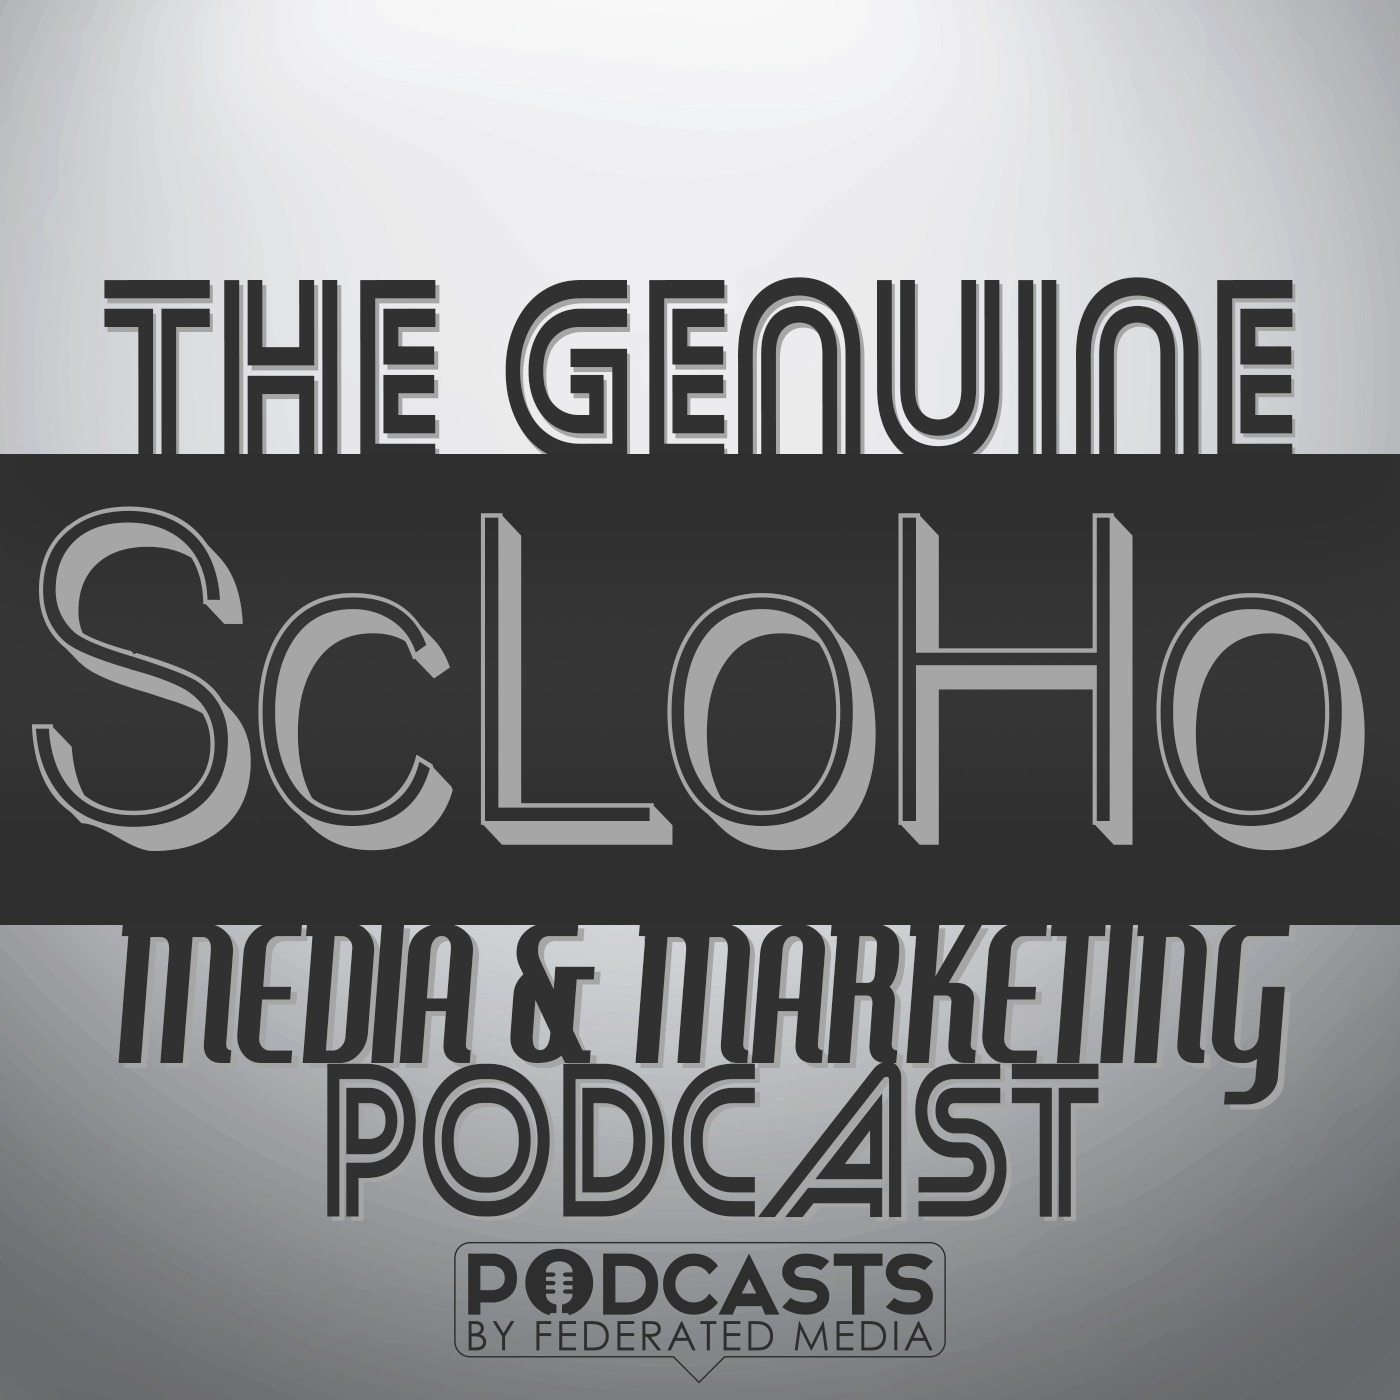 327 ScLoHo Podcast A LESSON ON ADVERTISING FROM PREACHERS AND TEACHERS